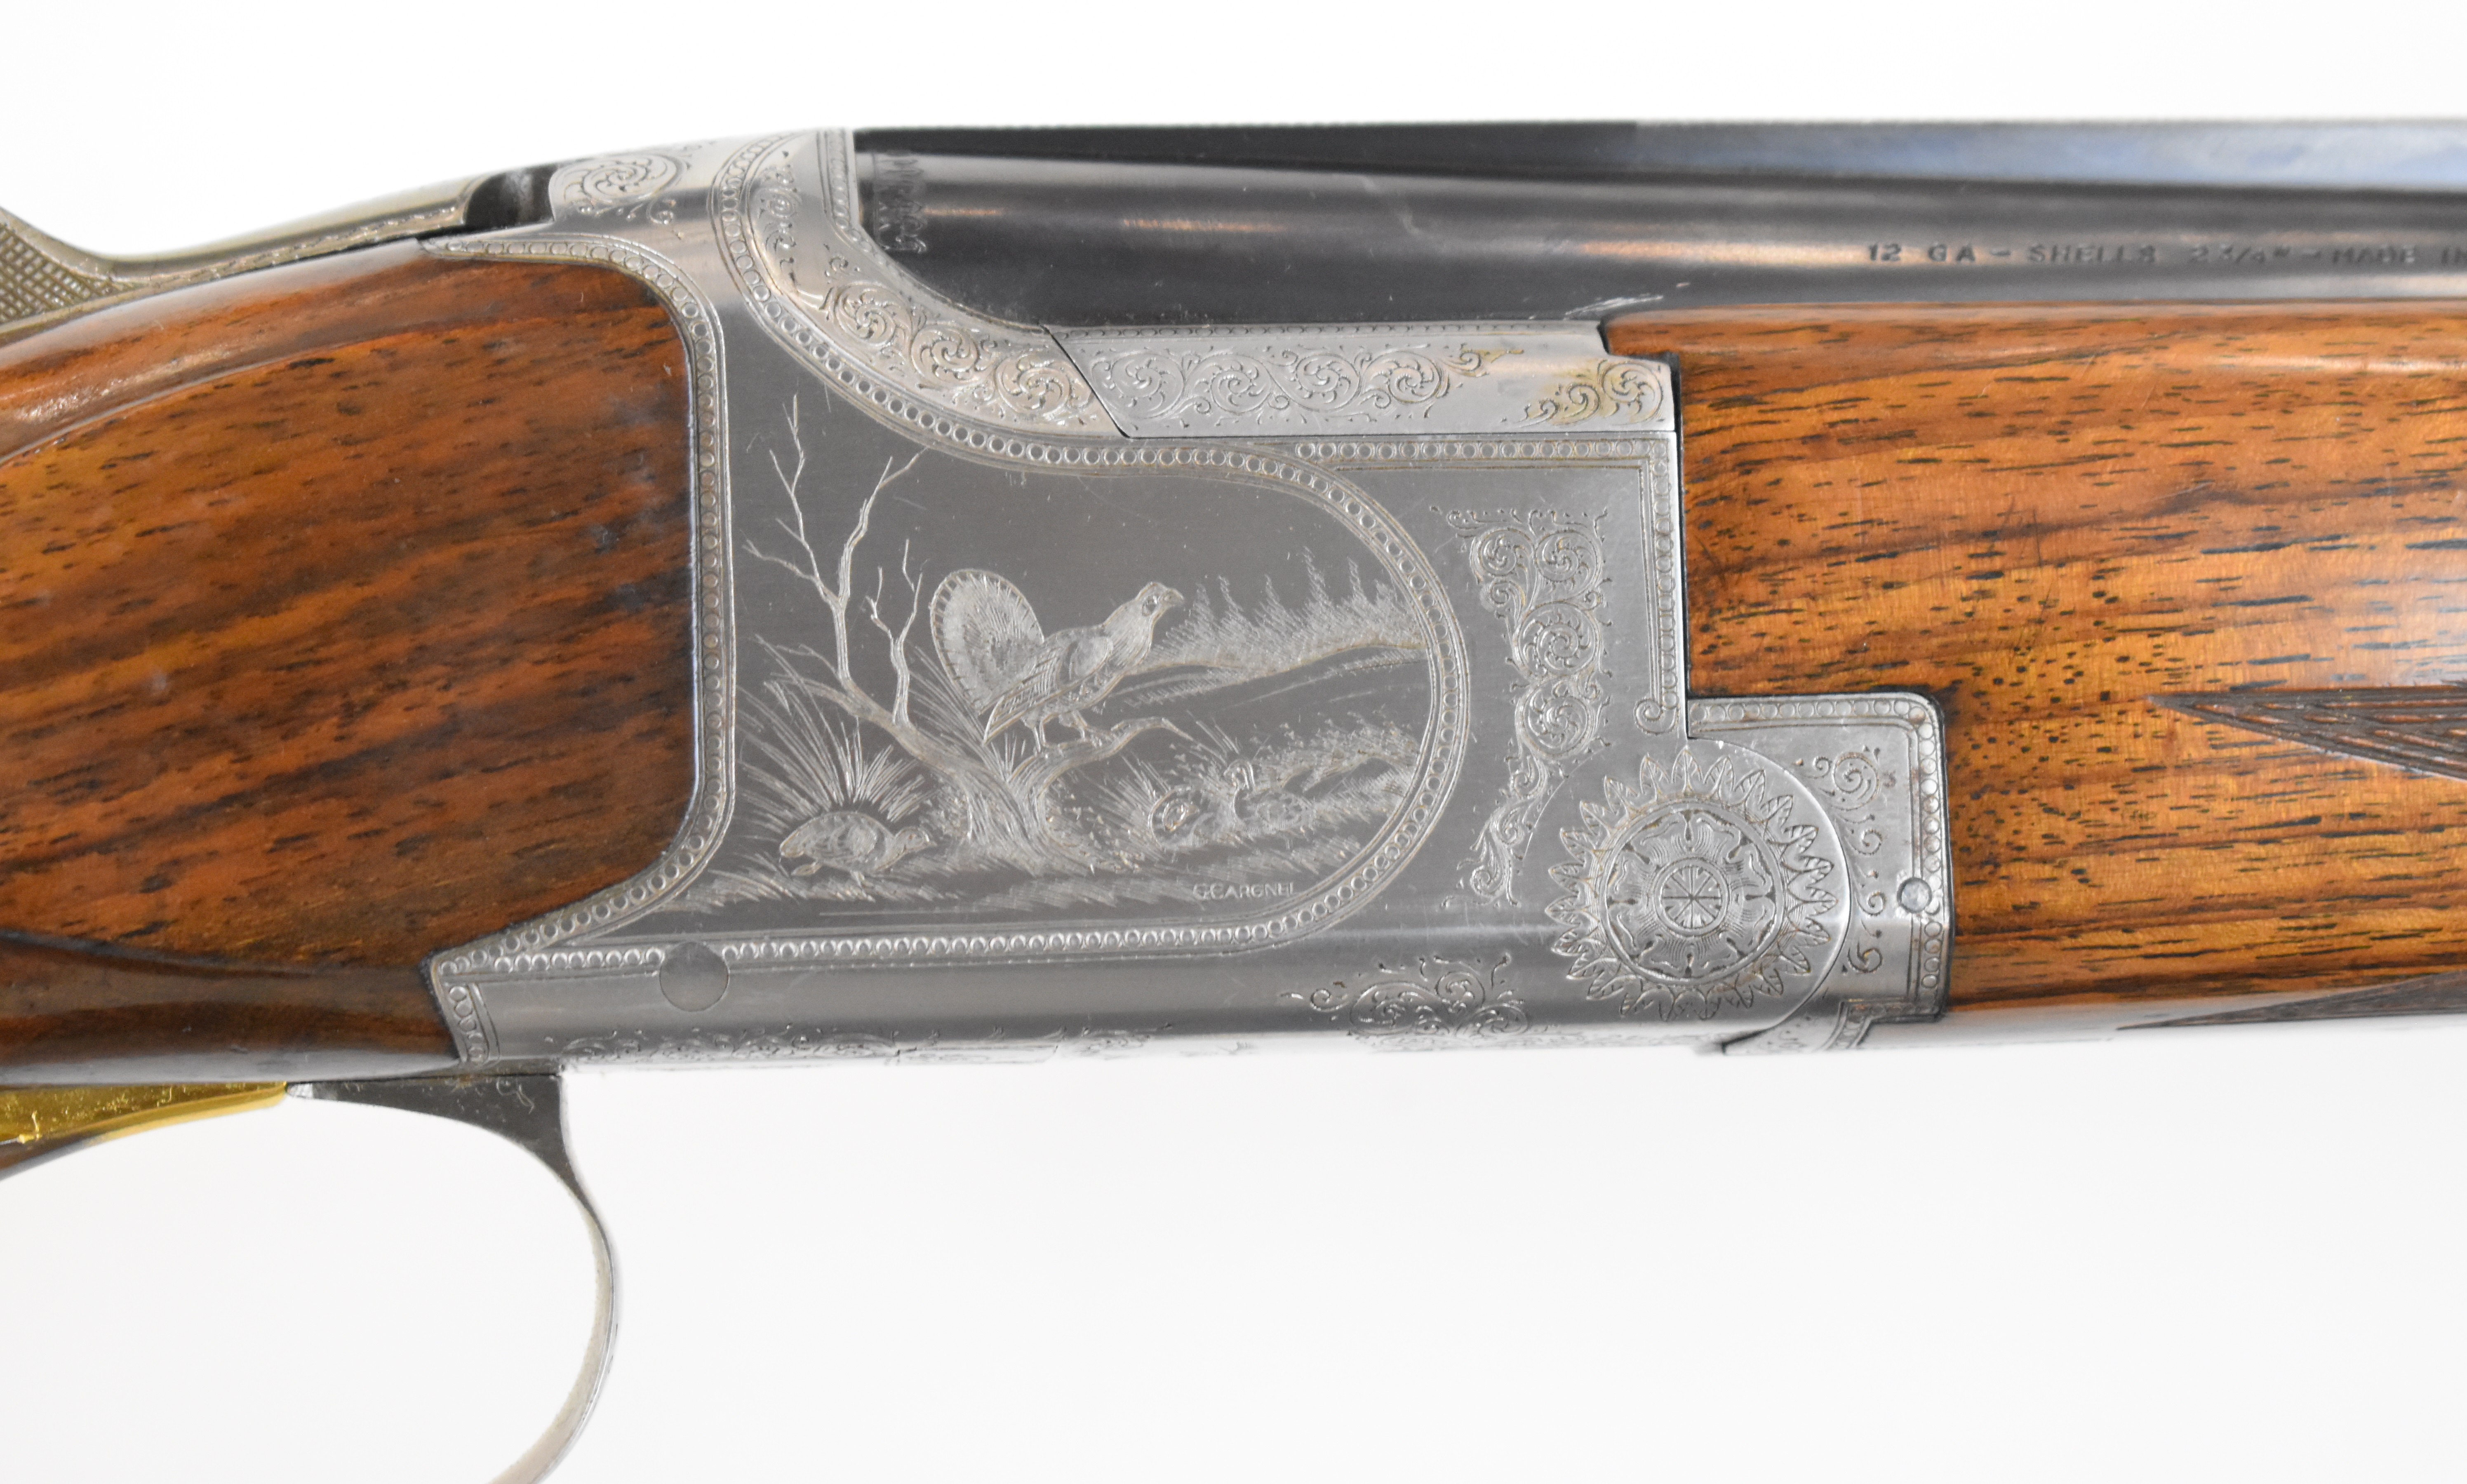 Browning B2 12 bore over and under shotgun with engraved scenes of birds to the locks and underside, - Image 6 of 12